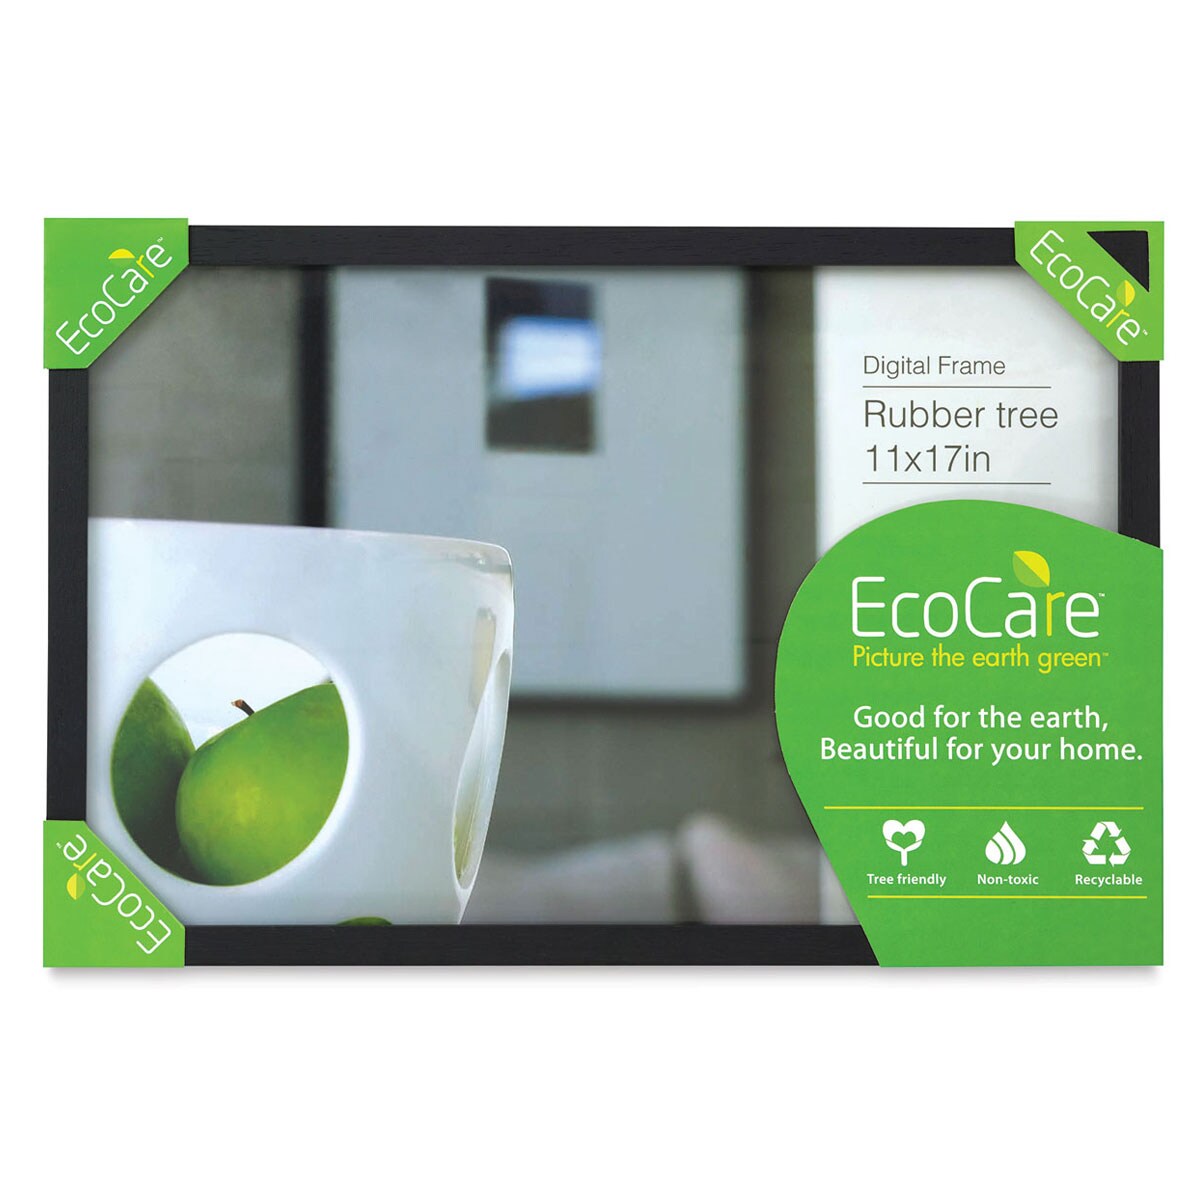 About EcoCare Technologies